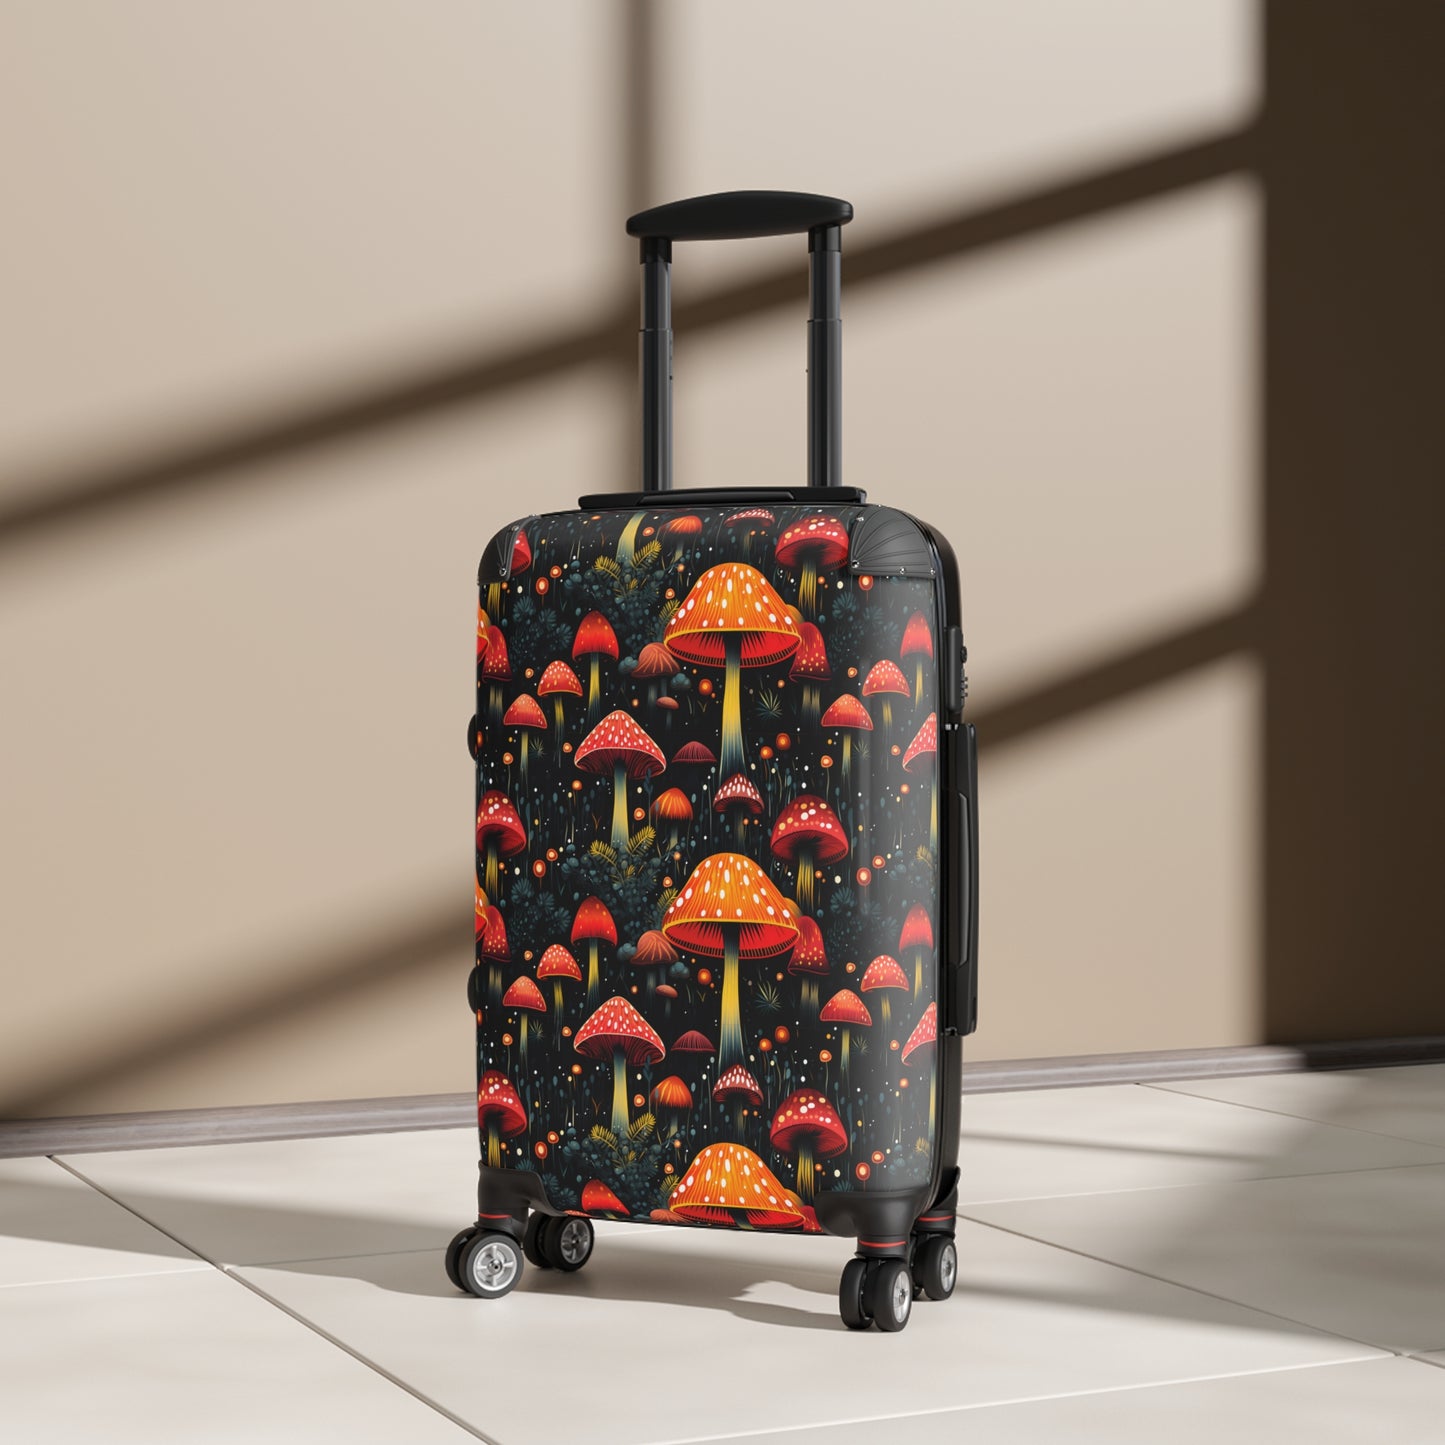 Psychedelic Mushrooms Stylish & Unique Hard-Shell Suitcase: Durable, Lightweight, Expandable Luggage with 360° Swivel Wheels & Secure Lock for Fashion-Forward Travelers, Free US Shipping